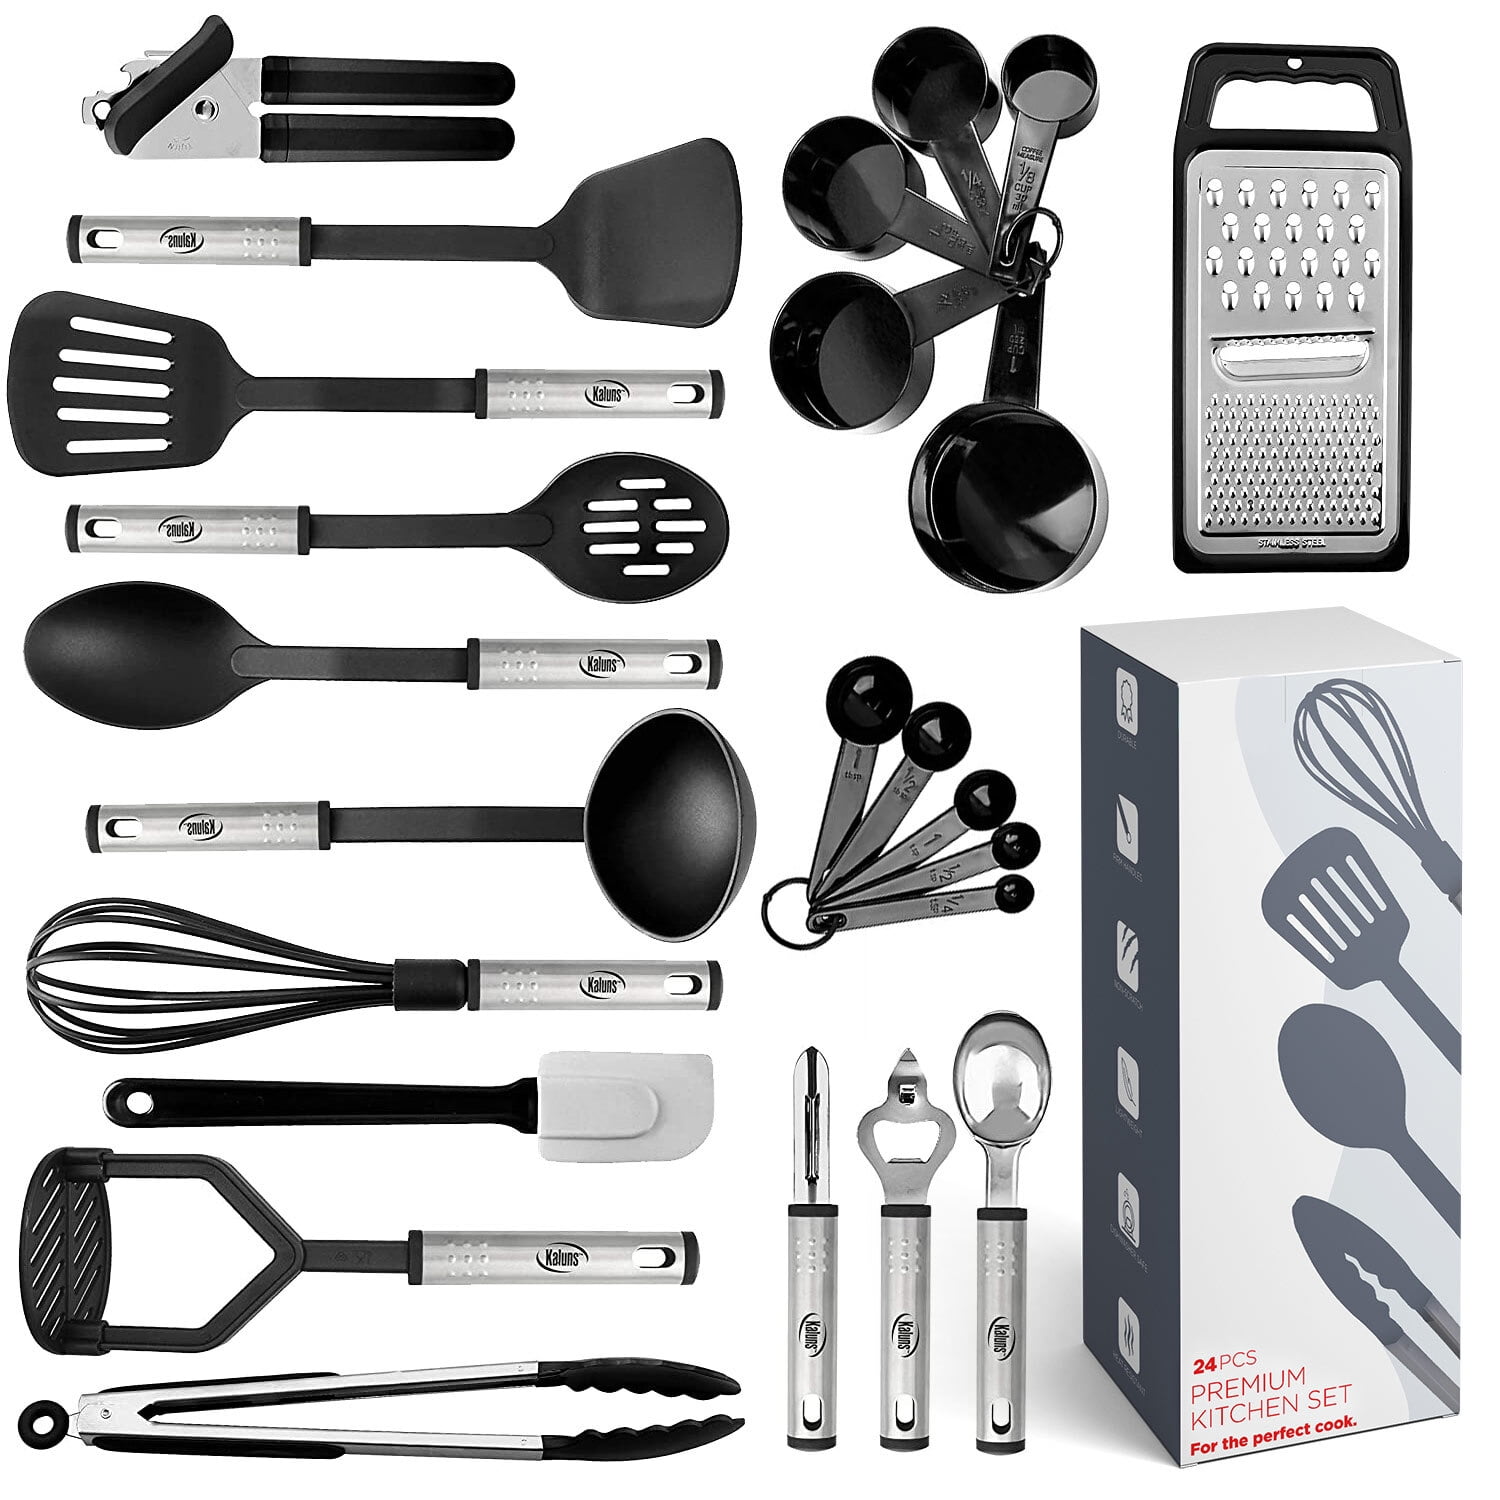 Marte 304 Stainless Steel Kitchen Cooking Utensils Set,6 Pcs All Metal Professional Cooking Tools Set,Matte Heavy Duty Cooking Uten